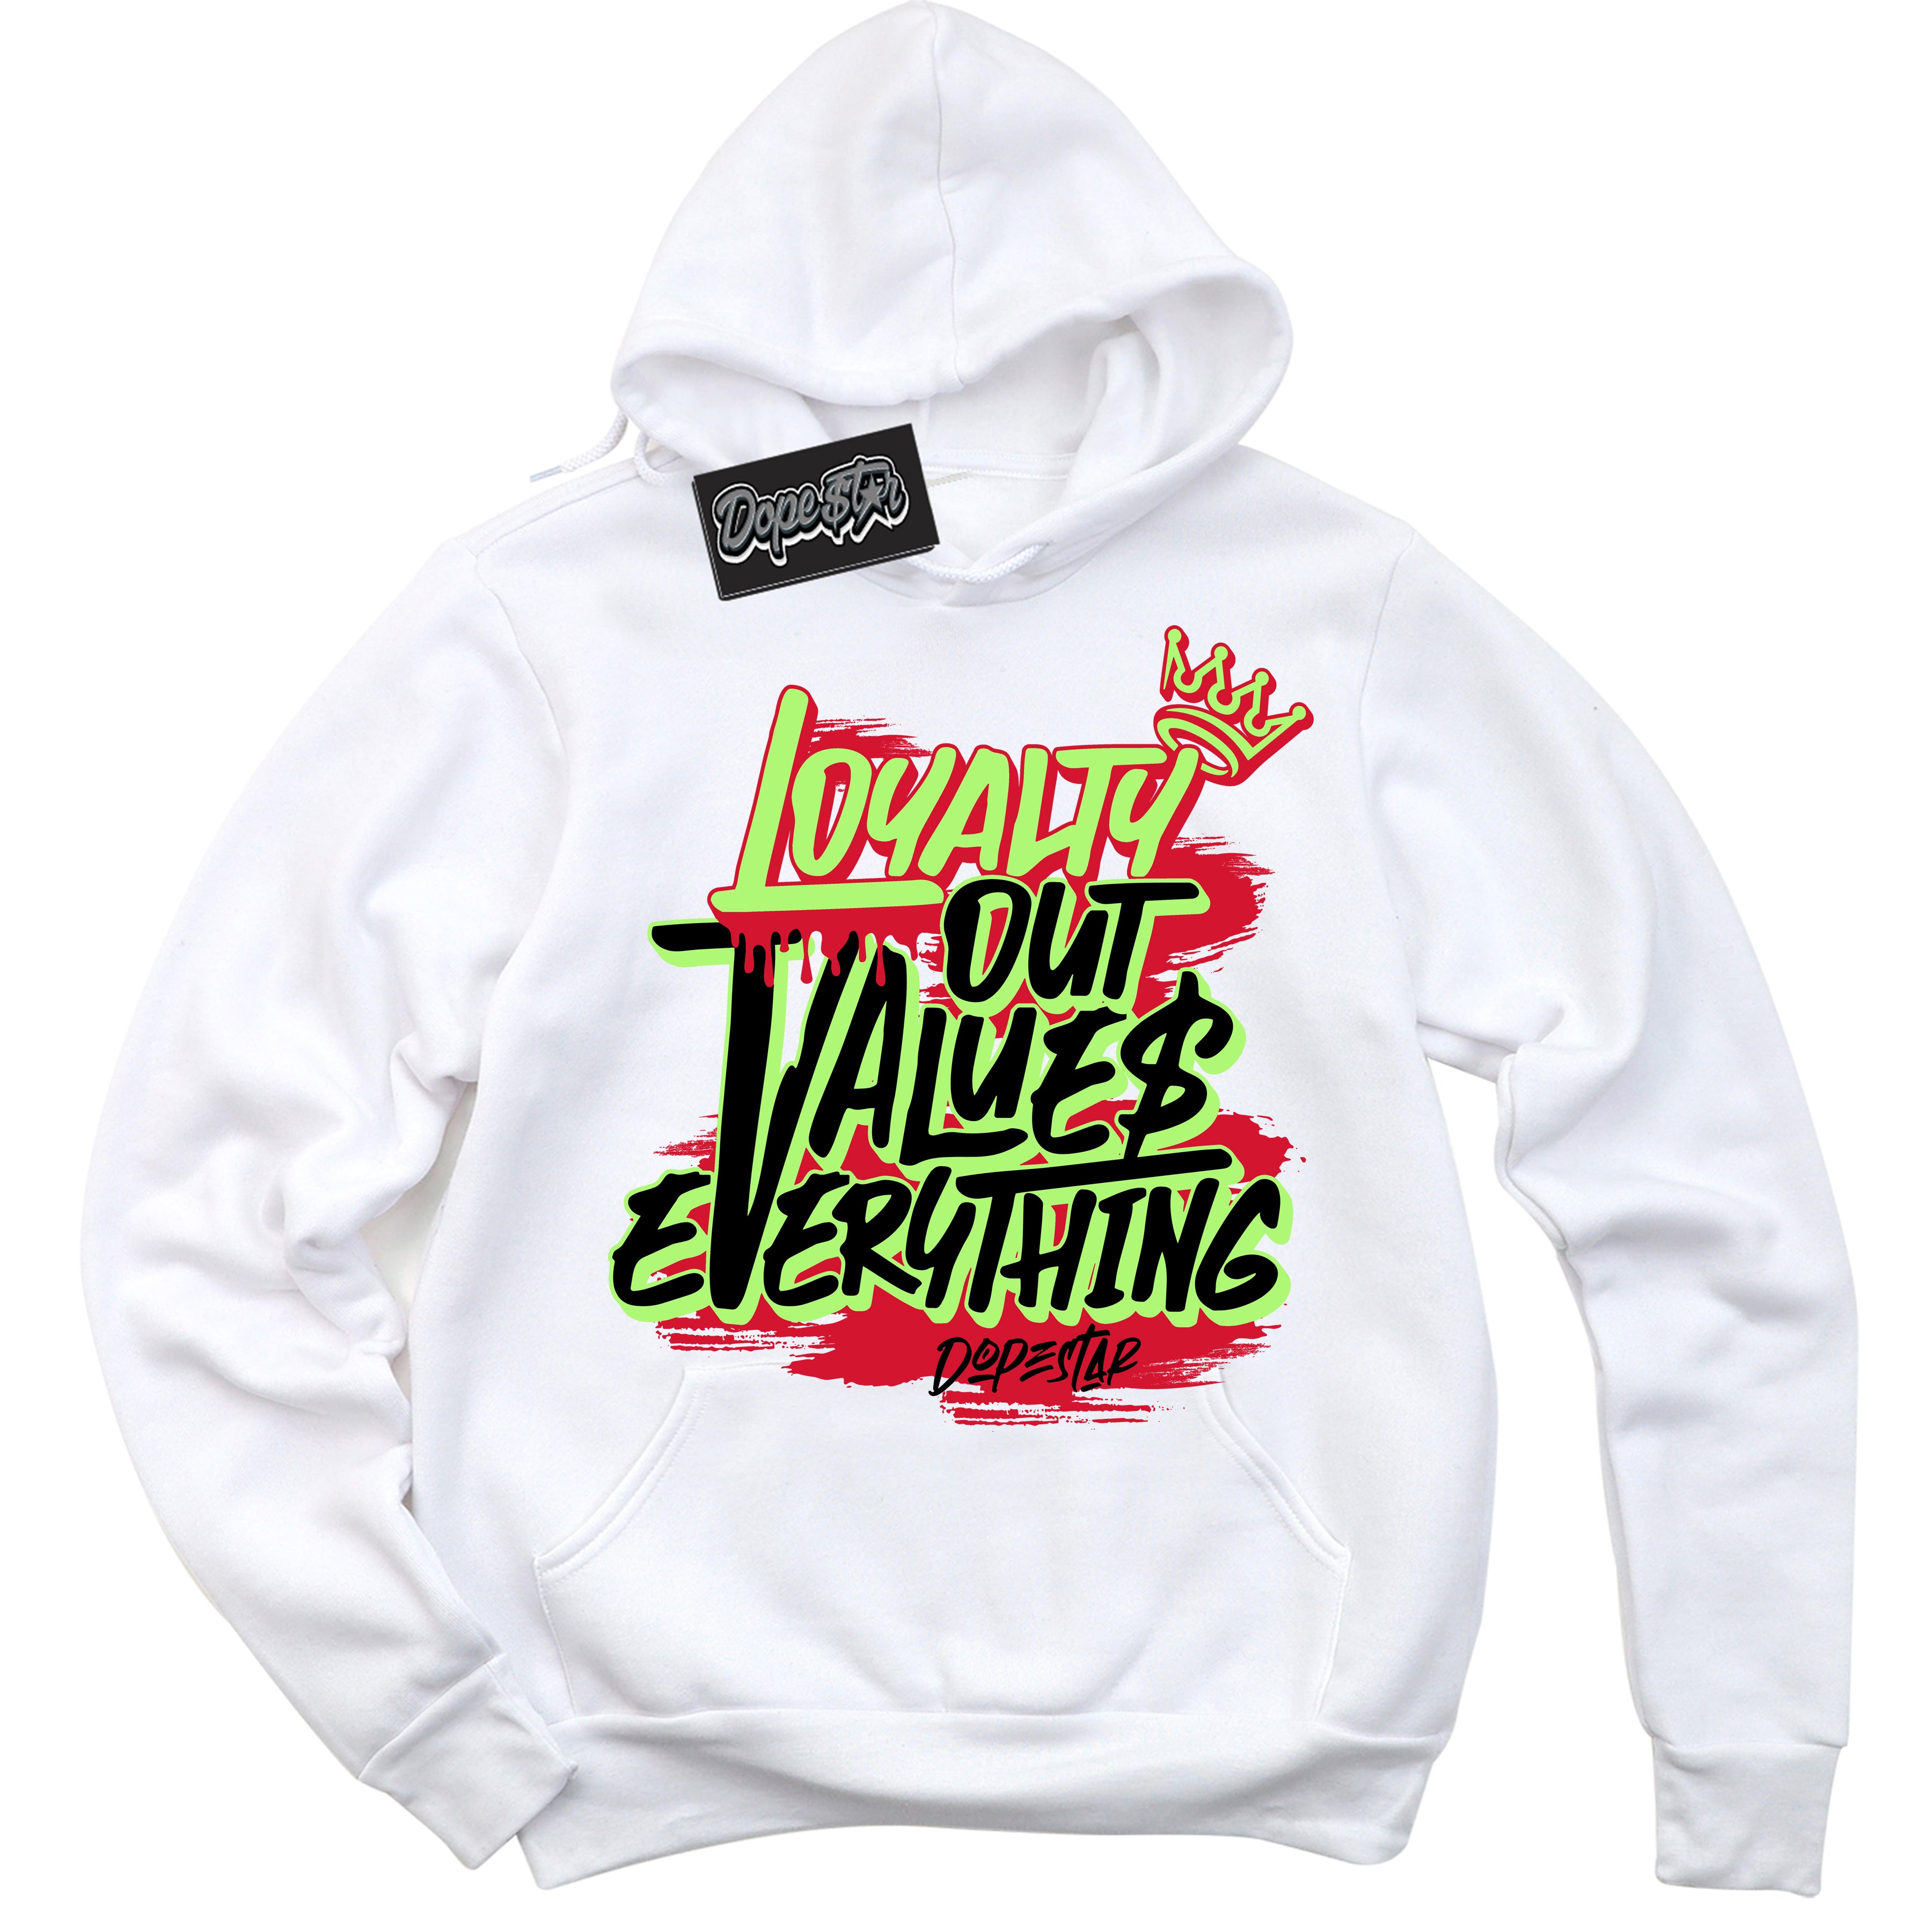 Cool White Hoodie with “ Loyalty Out Values Everything ”  design that Perfectly Matches Reverse Grinch 6s Sneakers.